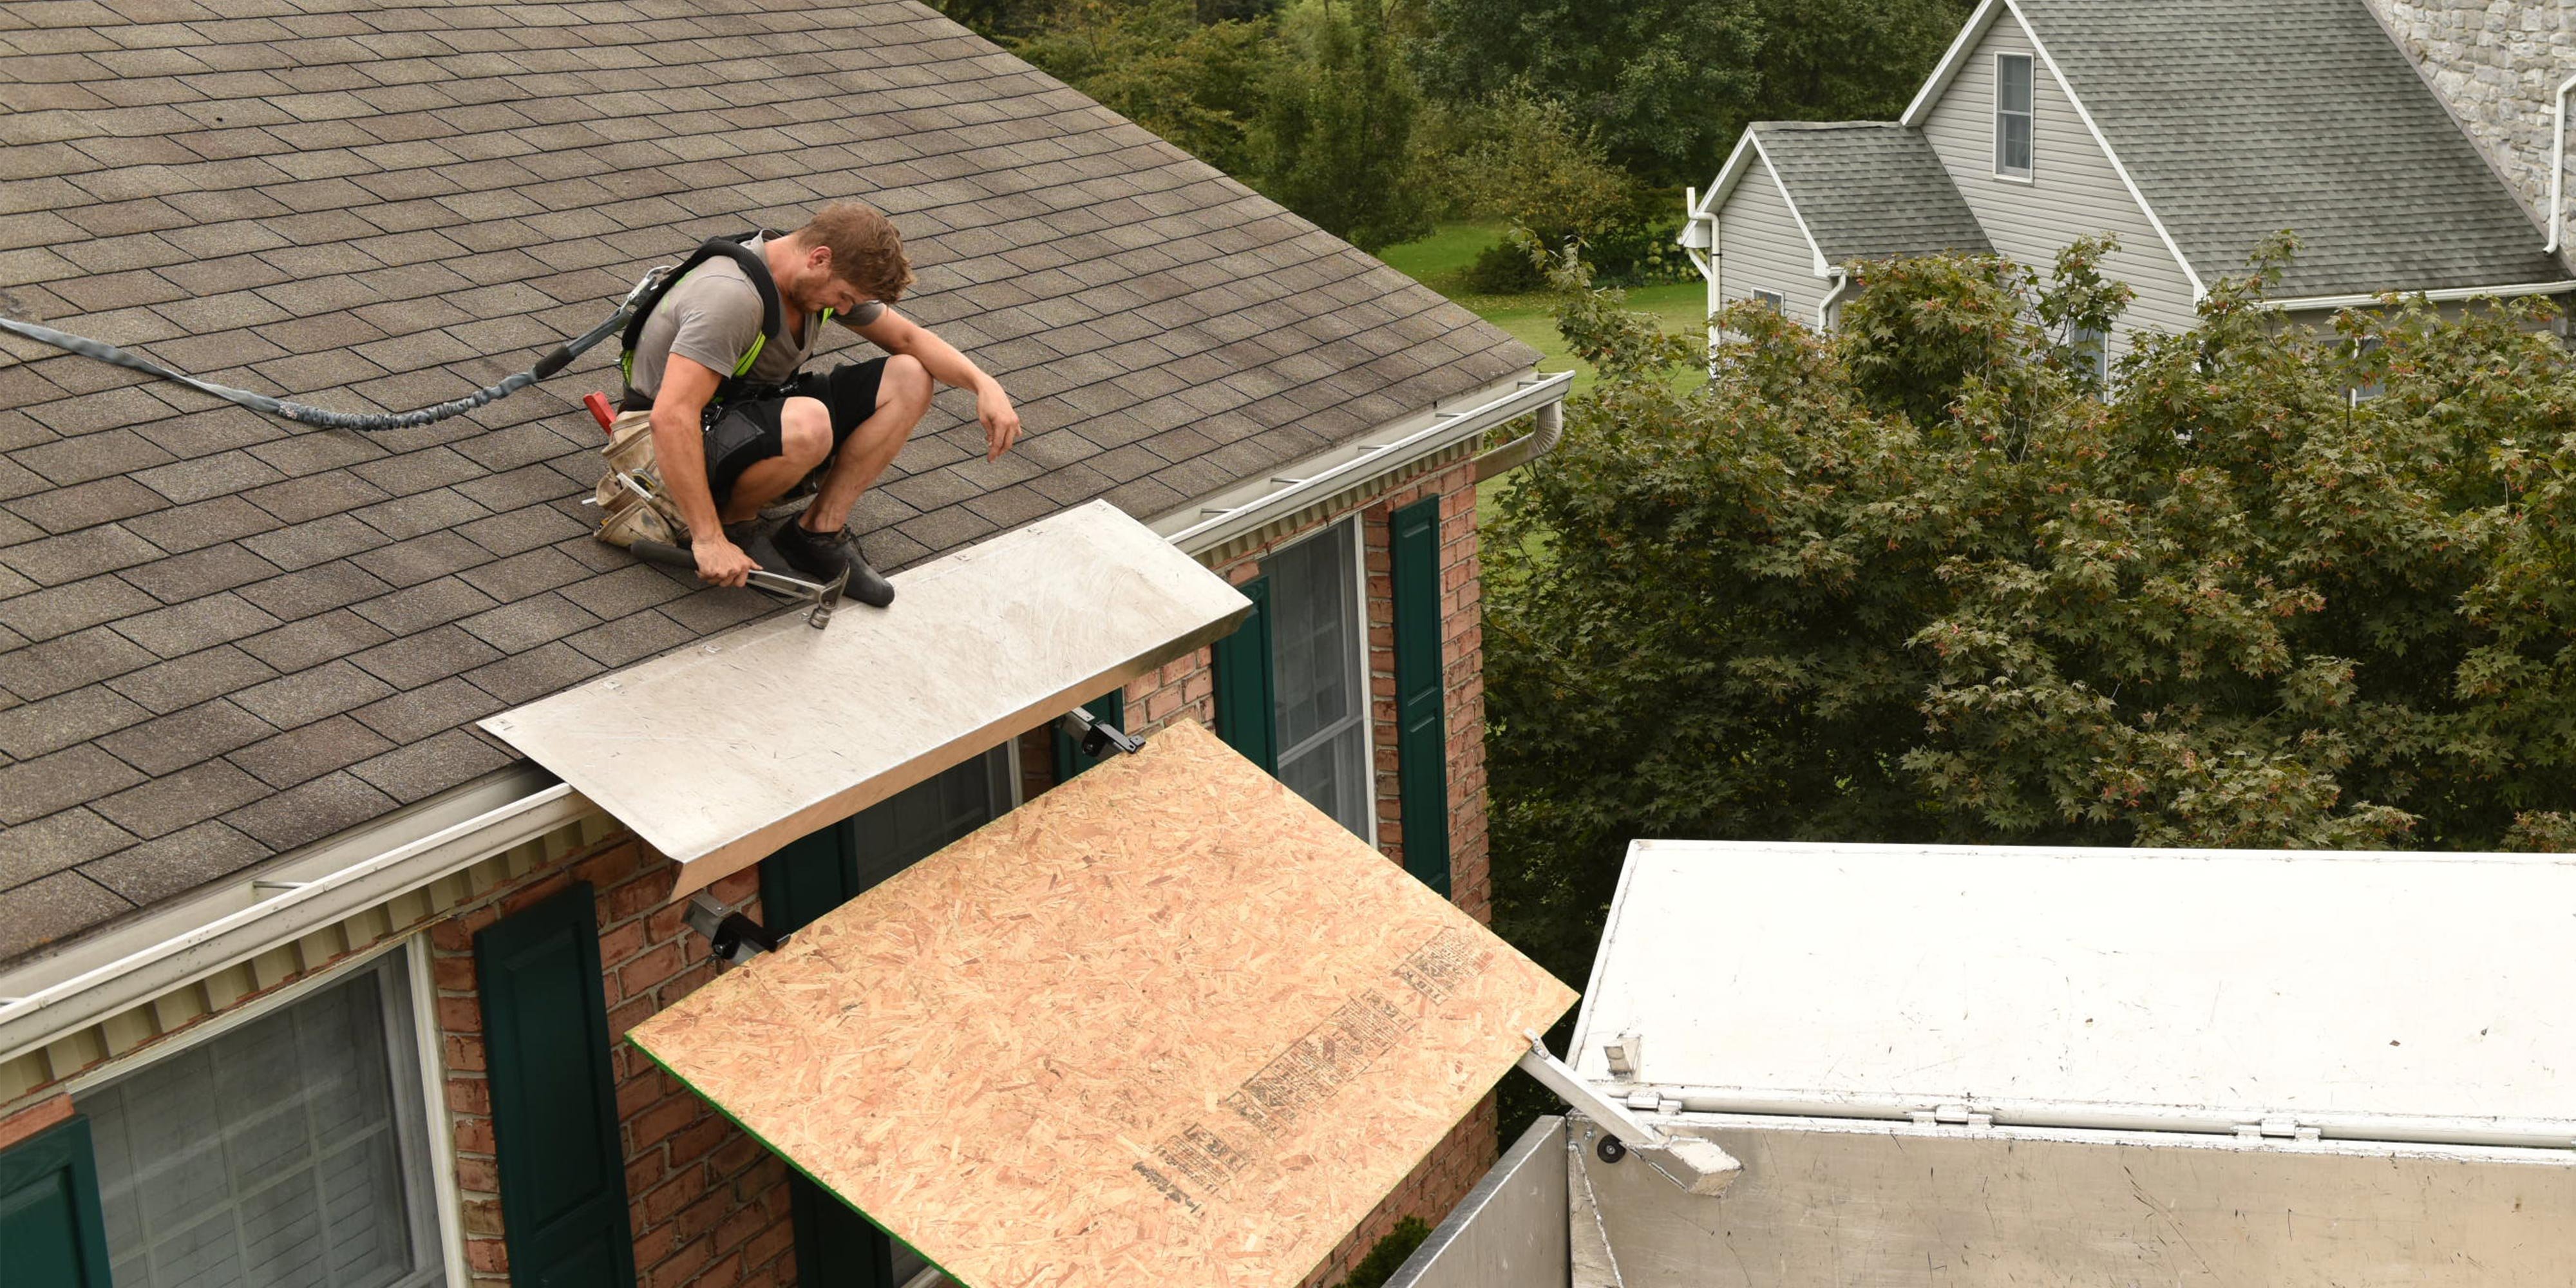 Equipter Roofing Accessories | Roofing Equipment Companions How To Keep From Sliding Off A Roof